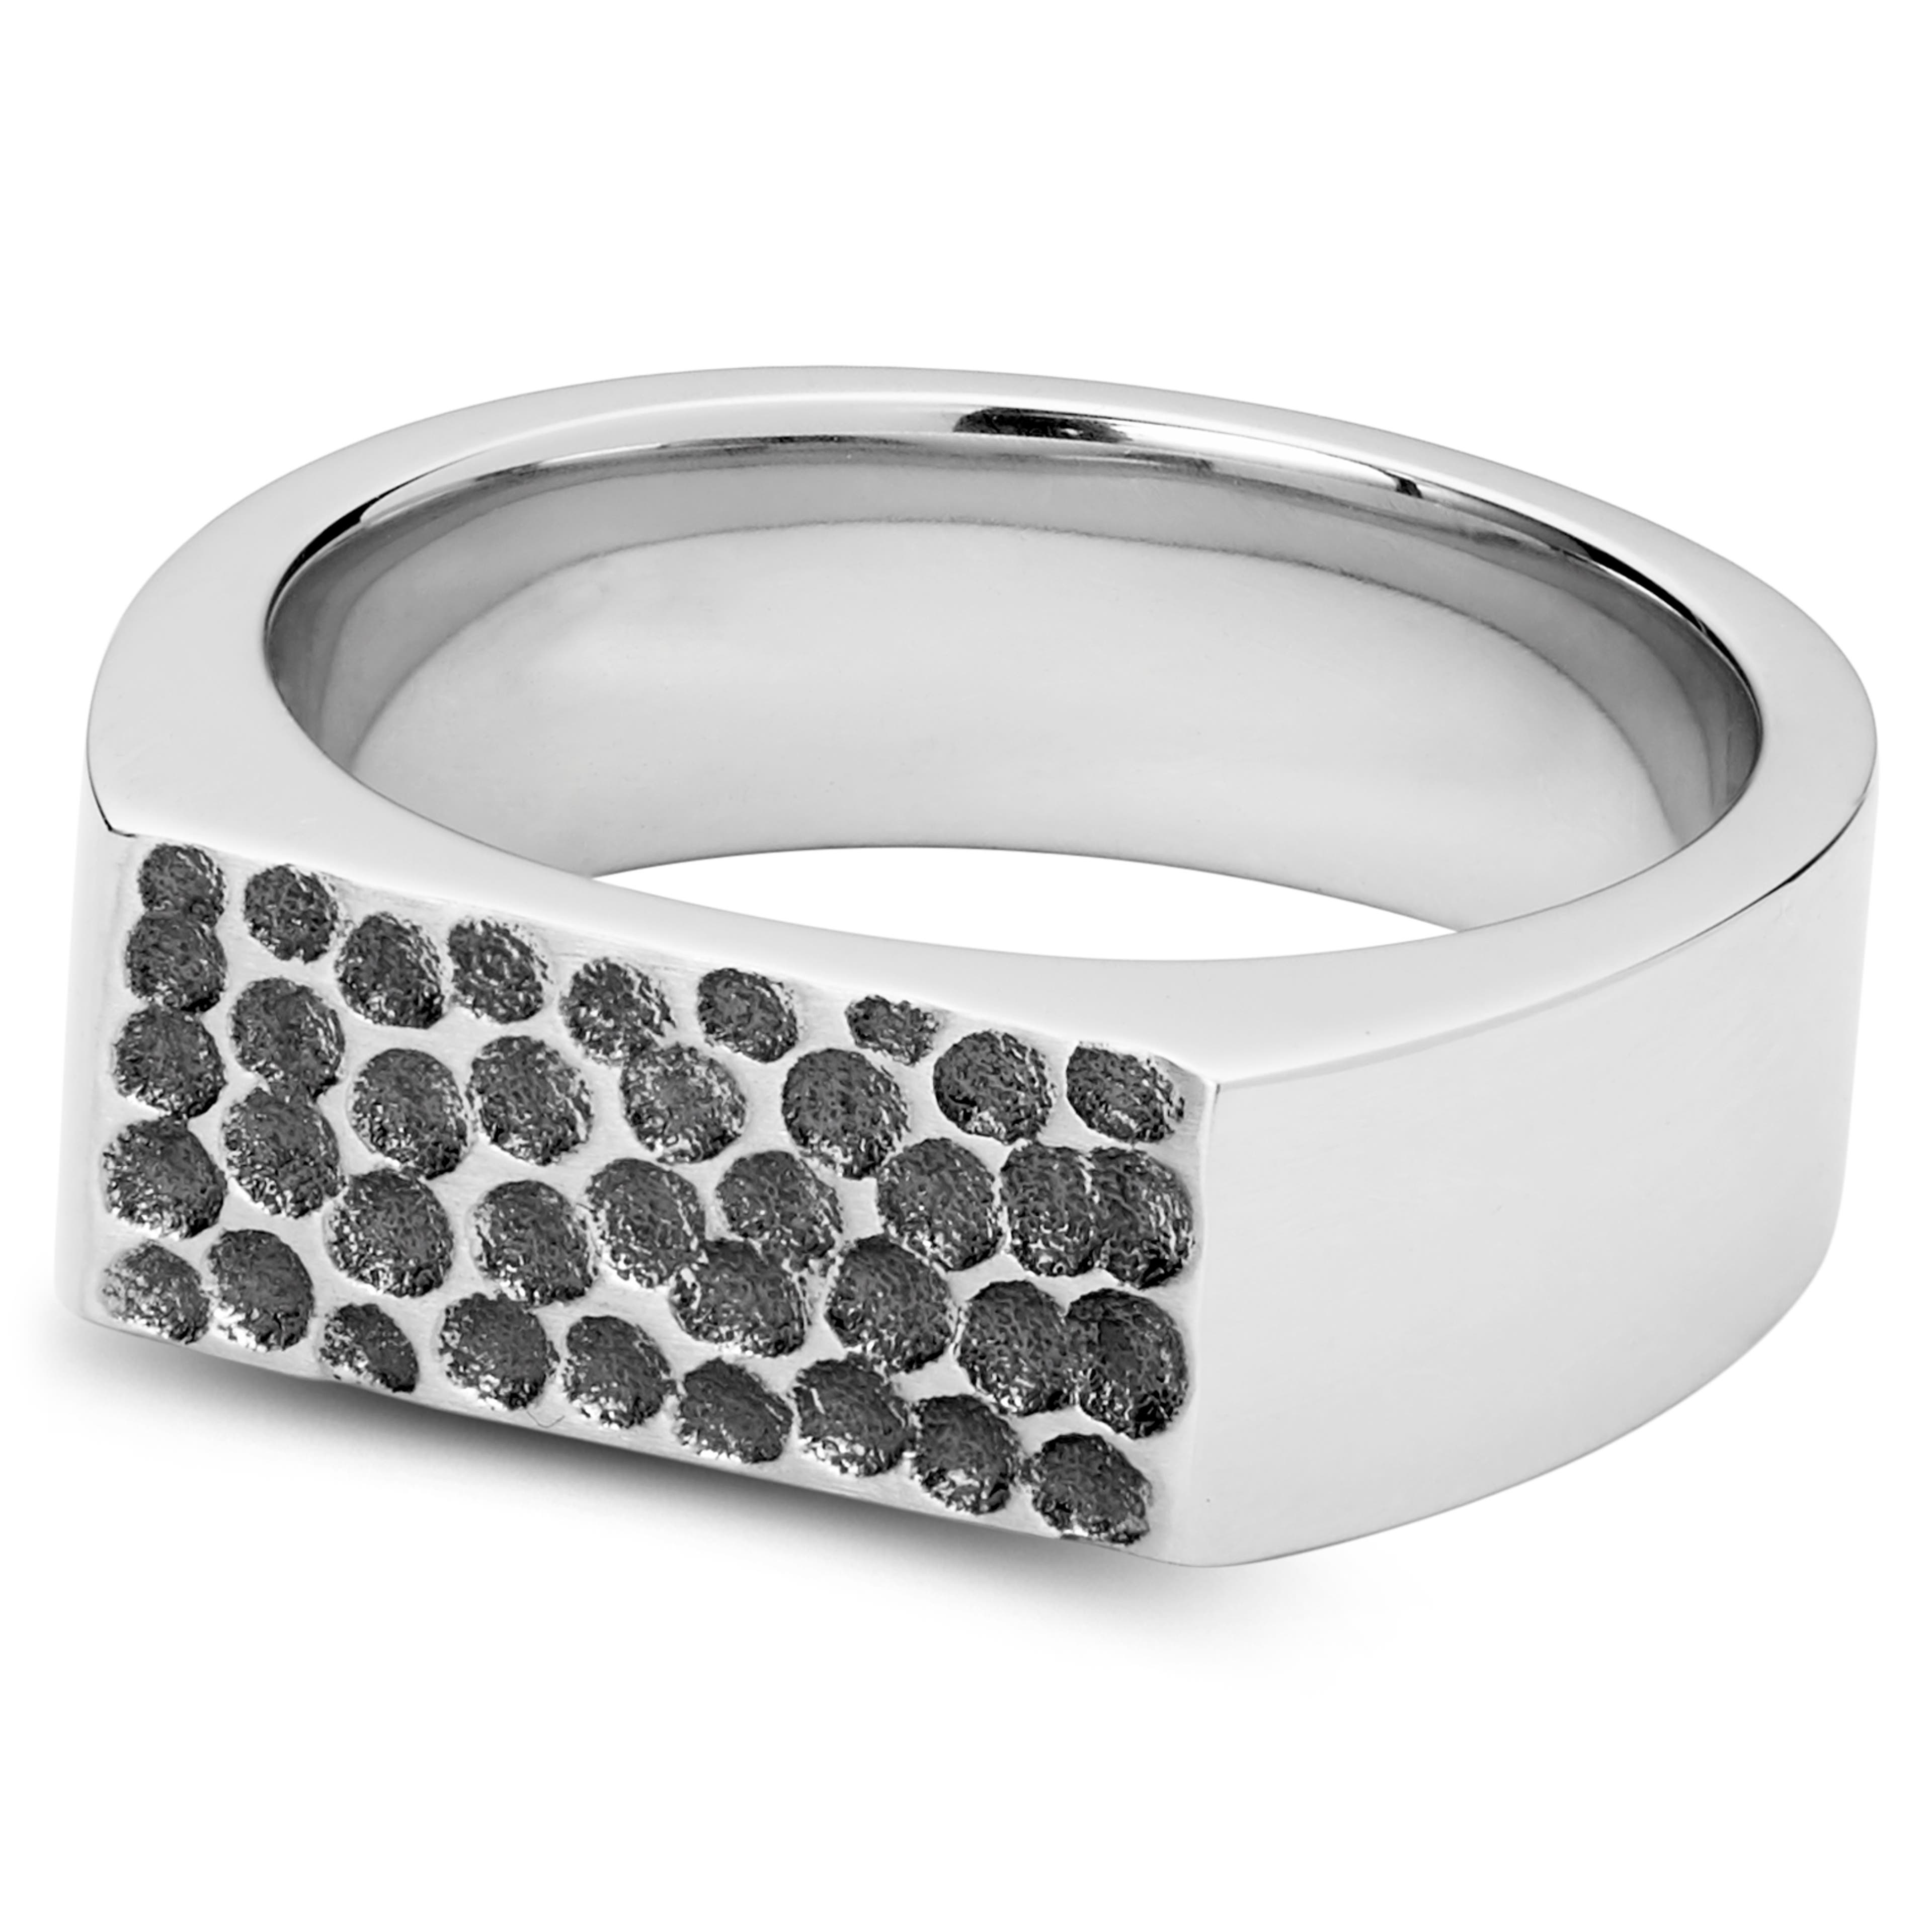 7 mm Silver-Tone Stainless Steel With Indentations Signet Ring